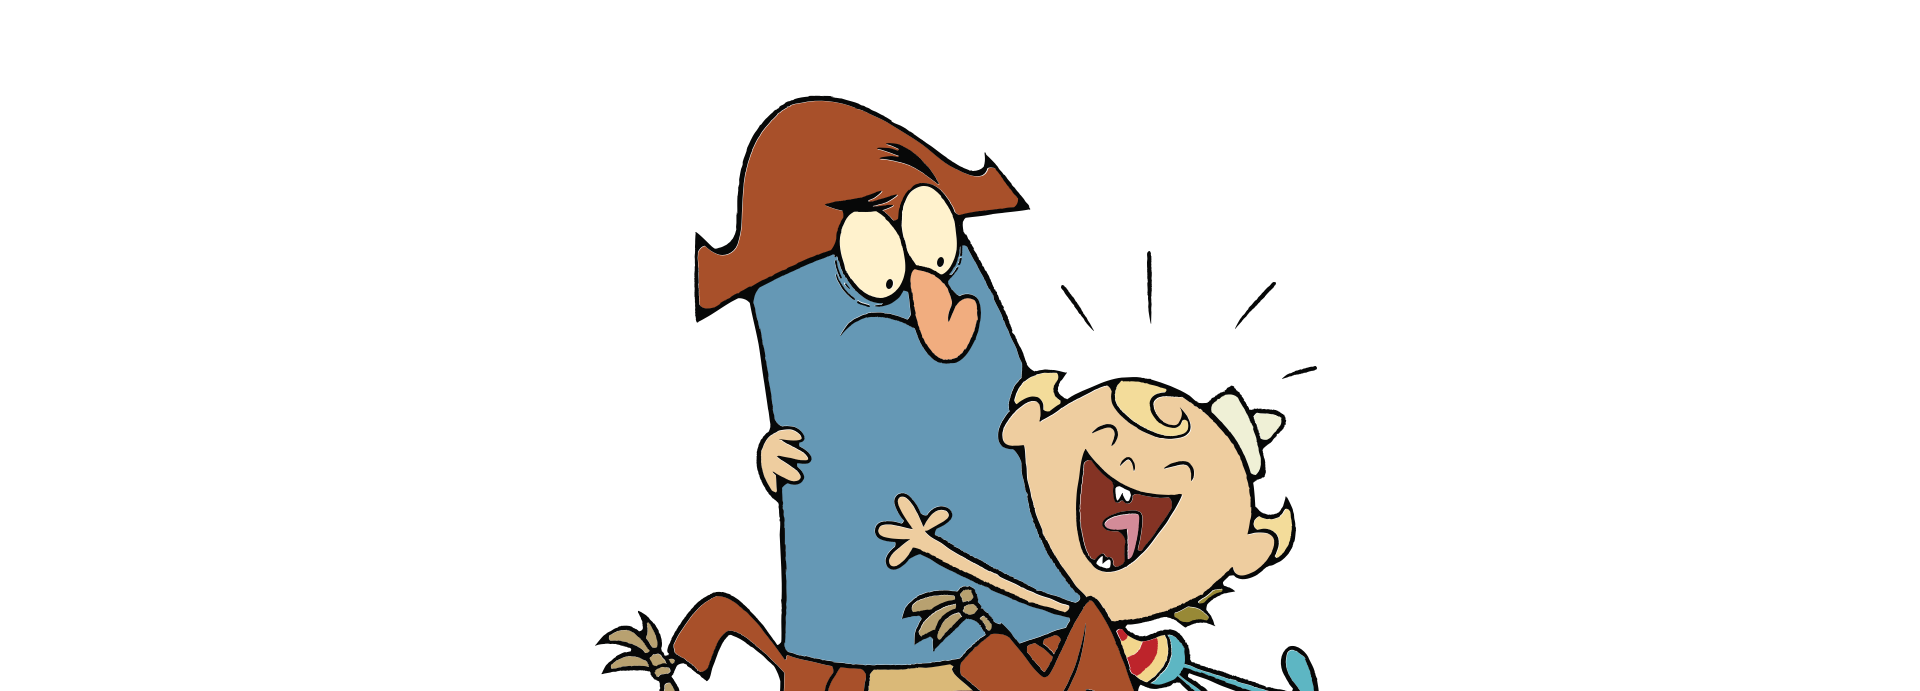 Misadventures of flapjack characters